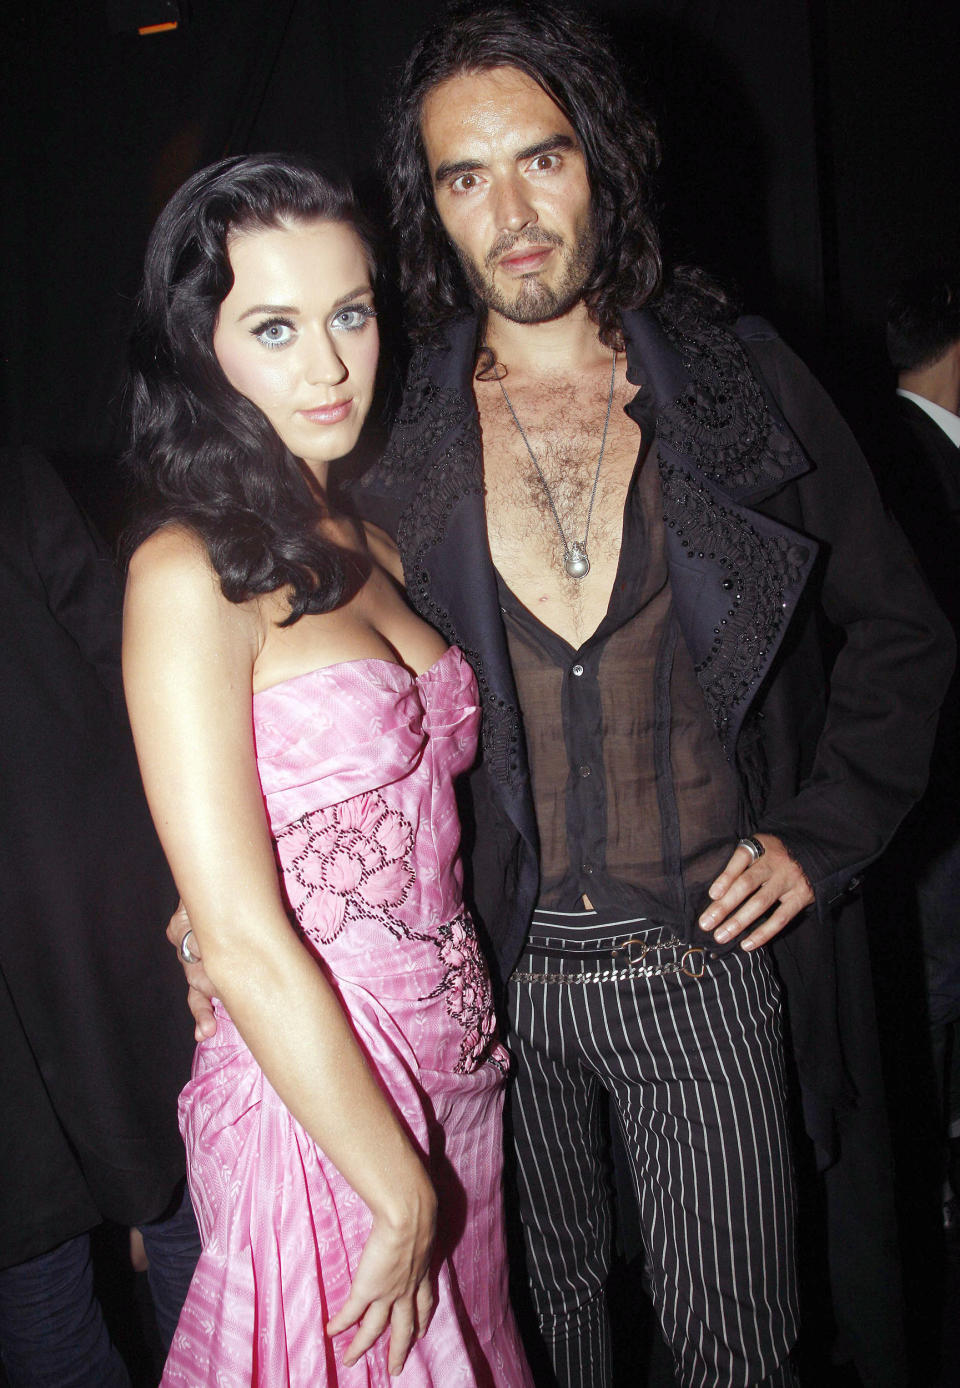 Katy Perry and Russell Brand attend John Galliano Pret a Porter show as part of the Paris Womenswear Fashion Week Spring/Summer 2010 at Halle Freyssinet on October 7, 2009 in Paris, France.  (Michel Dufour / WireImage)